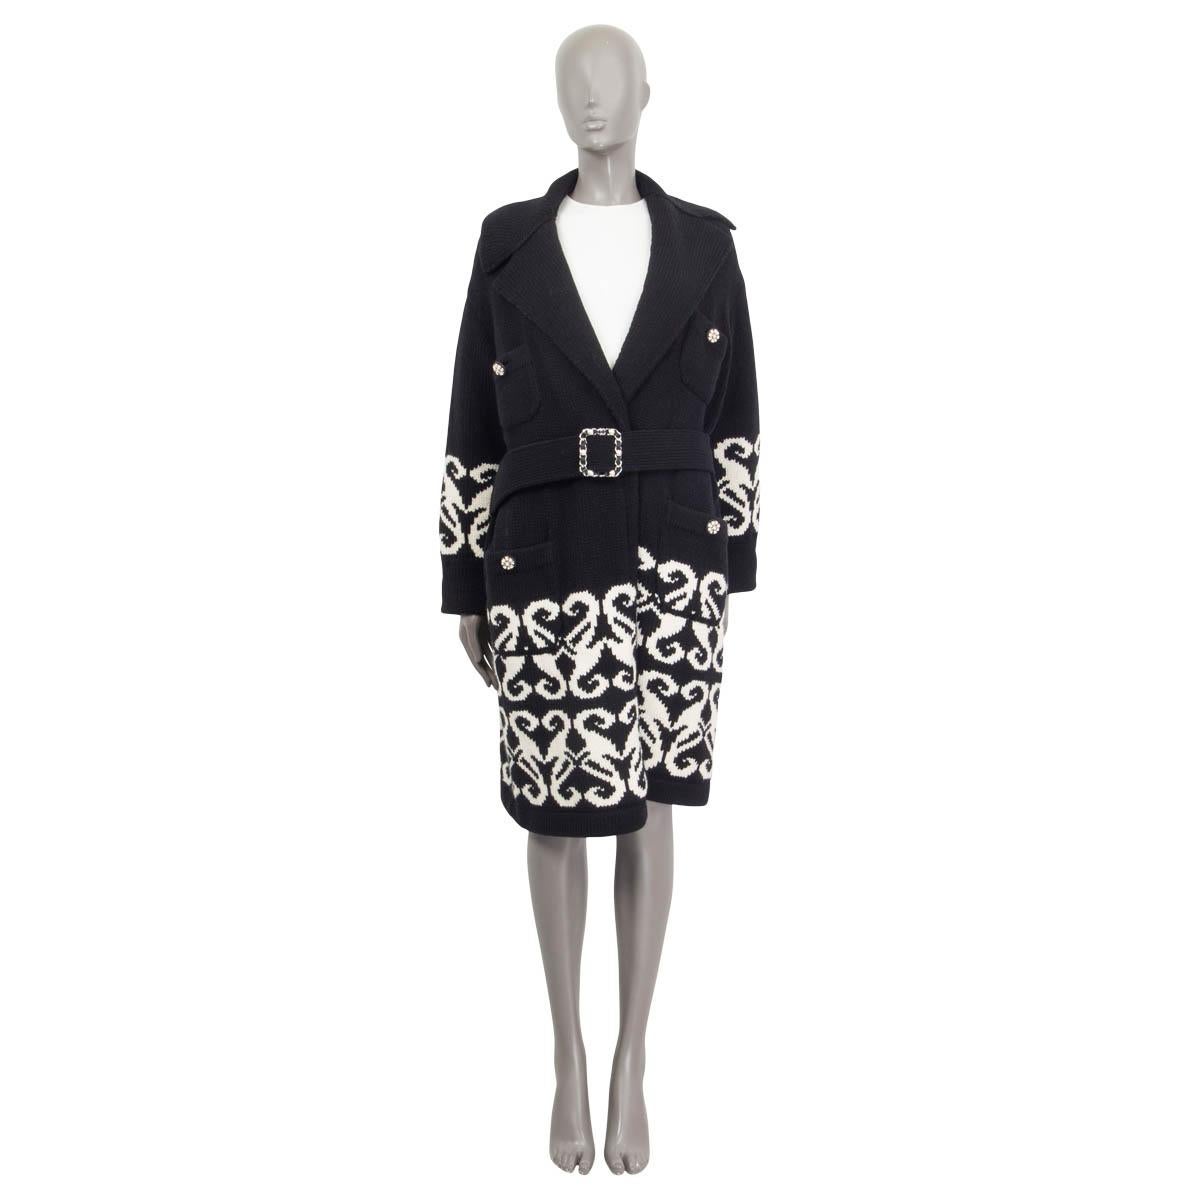 100% authentic Chanl Fall/Winter 2019 open knit coat in black and white wool (70%) and cashmere (30%). Features four buttoned pockets on the front. Opens with a black and white leather and pearl embellished belt. Unlined. Has been worn and is in